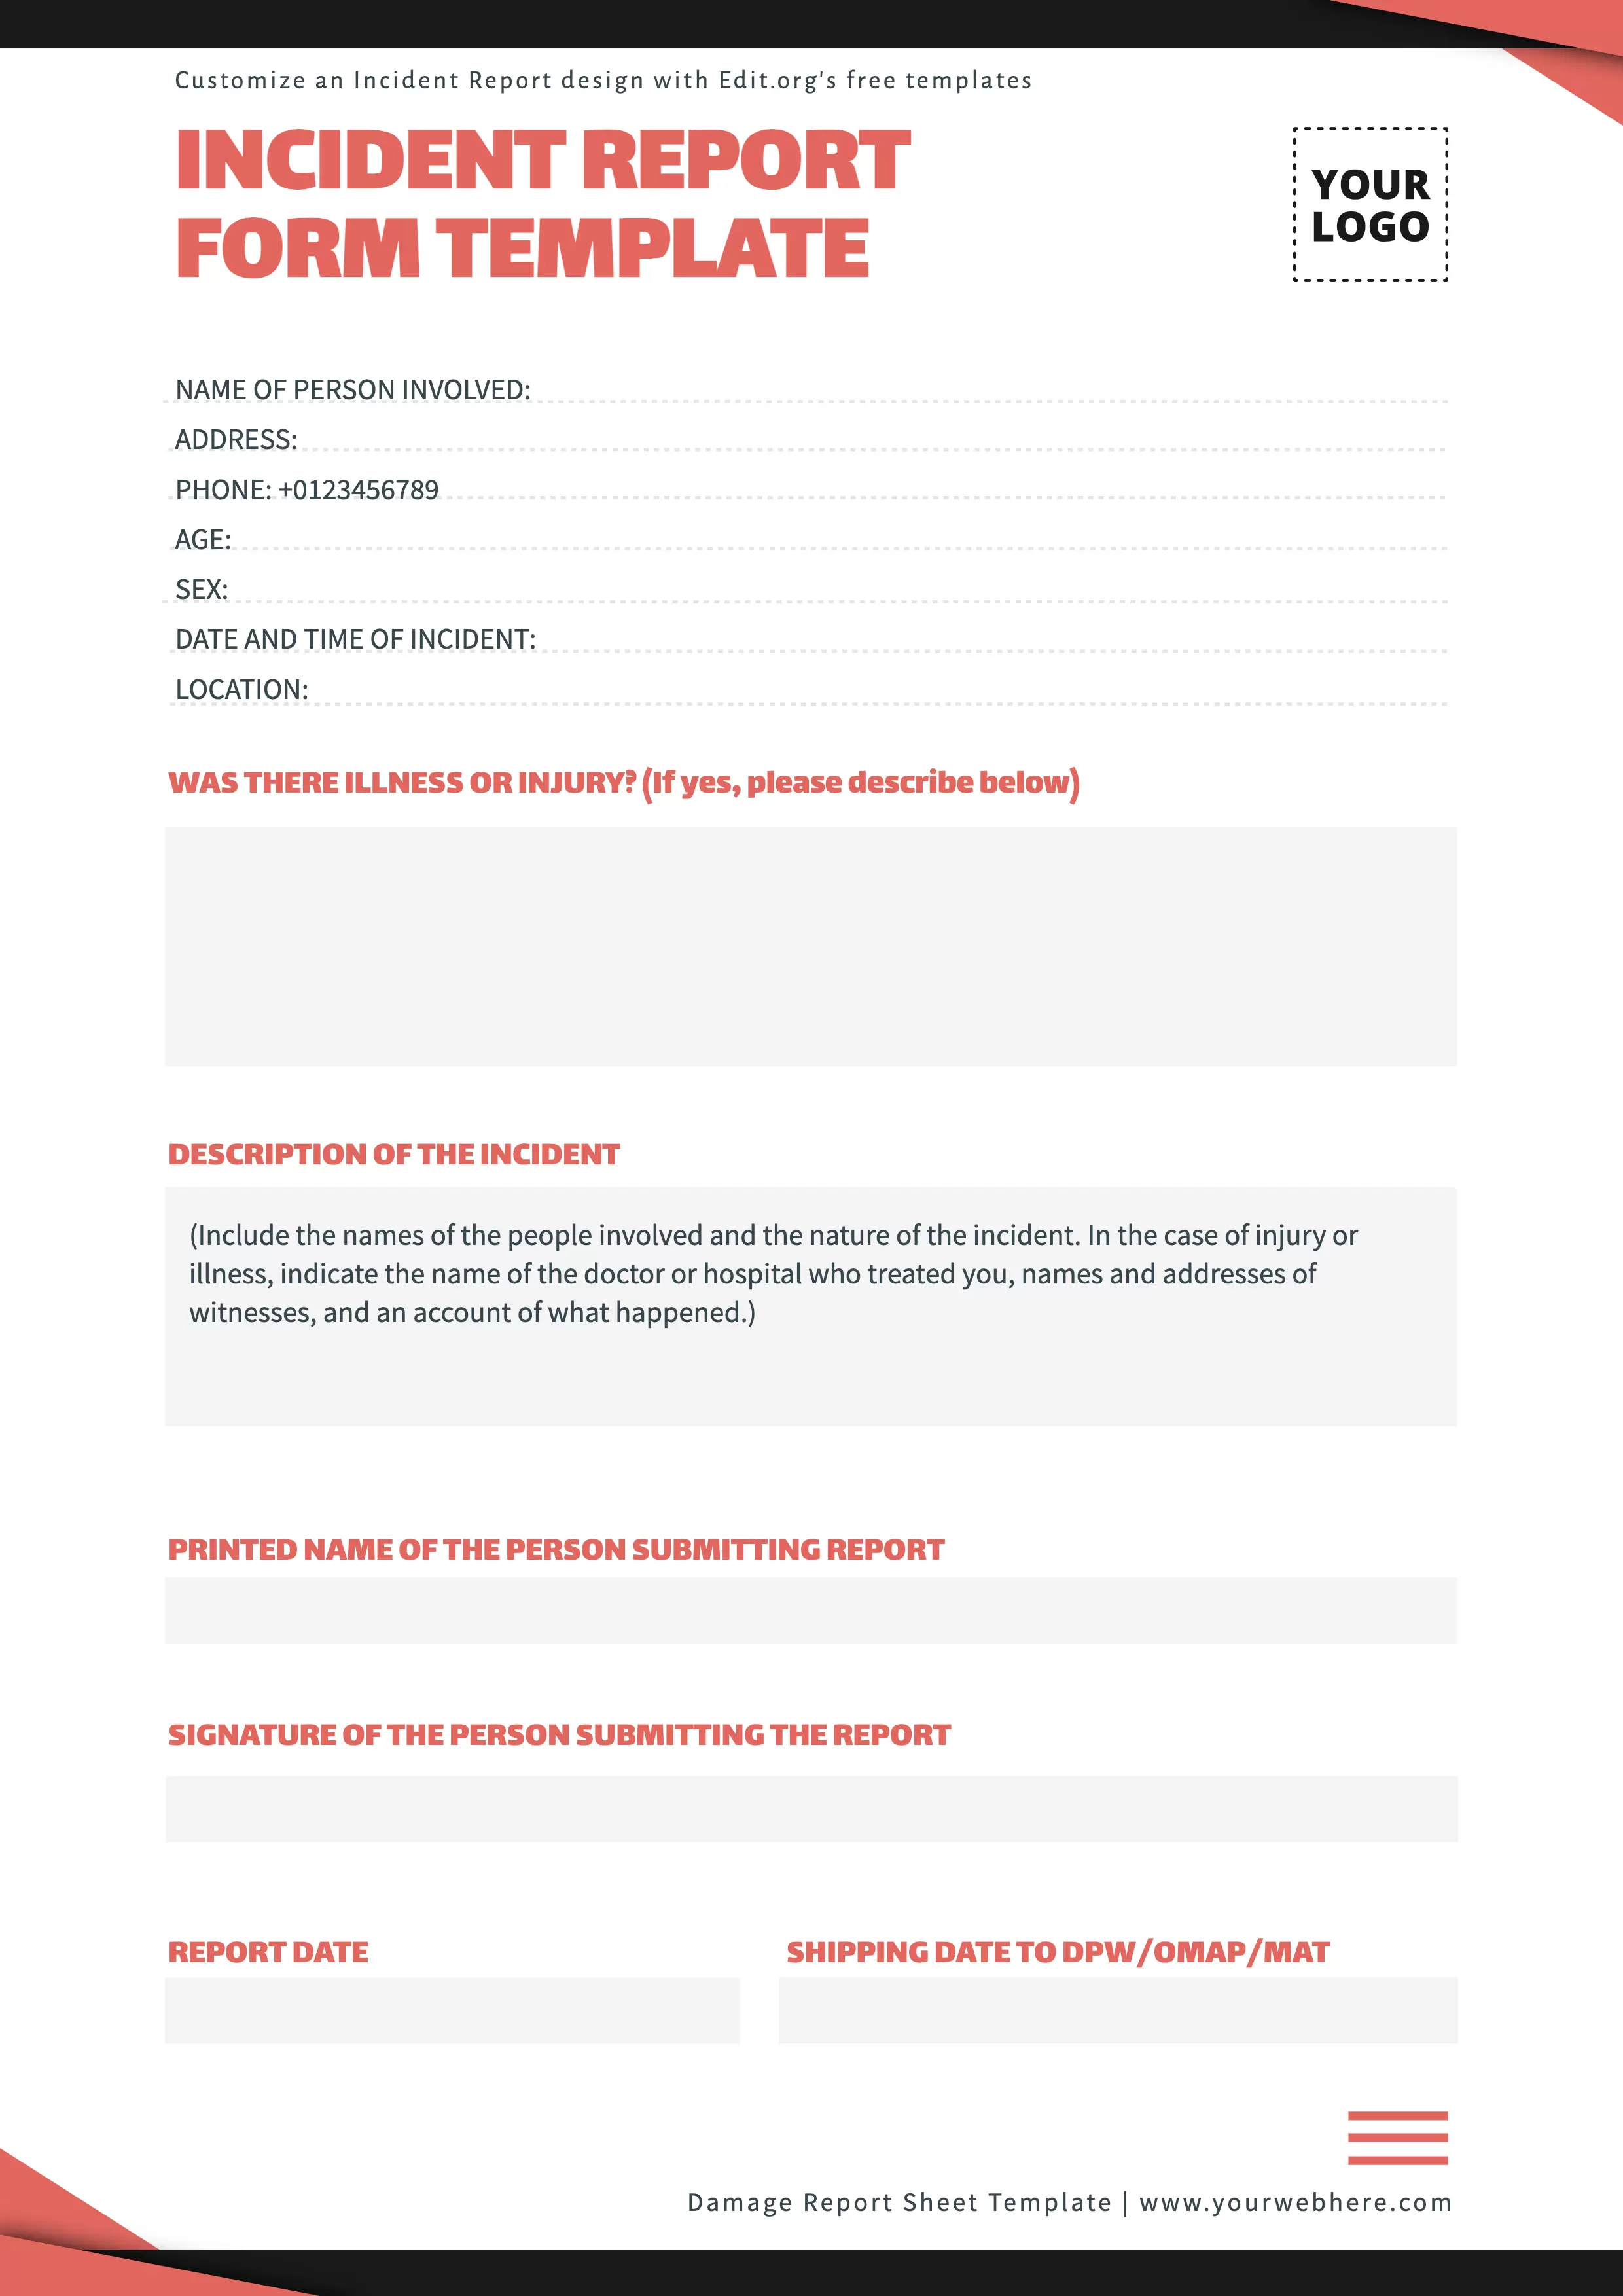 Free Incident Report template to customize online